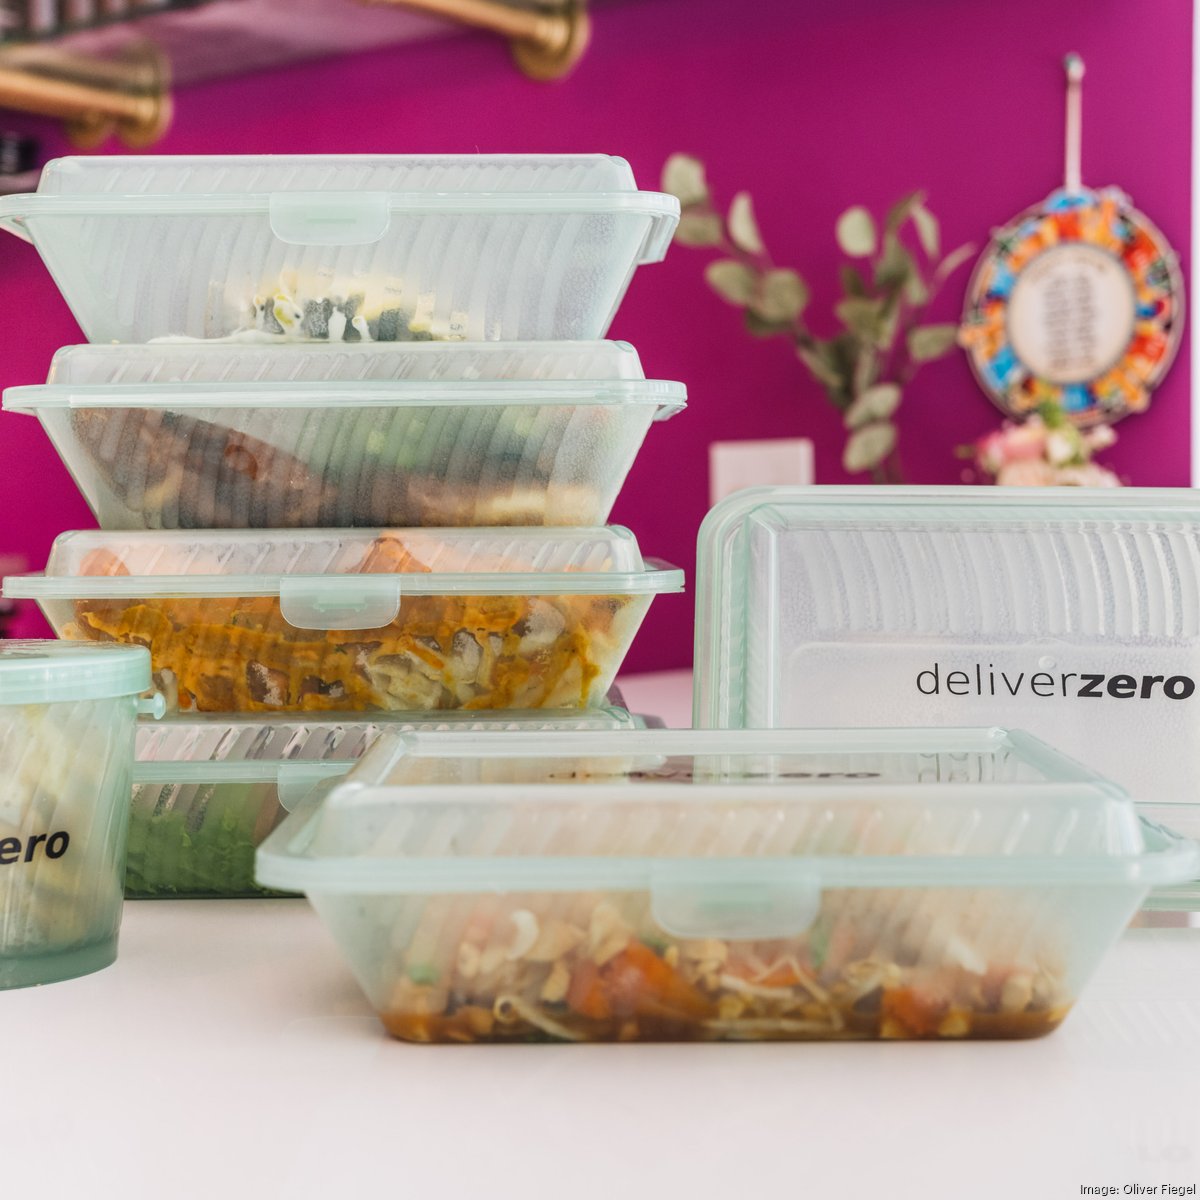 Colorado Inno - New York startup takes its reusable takeout